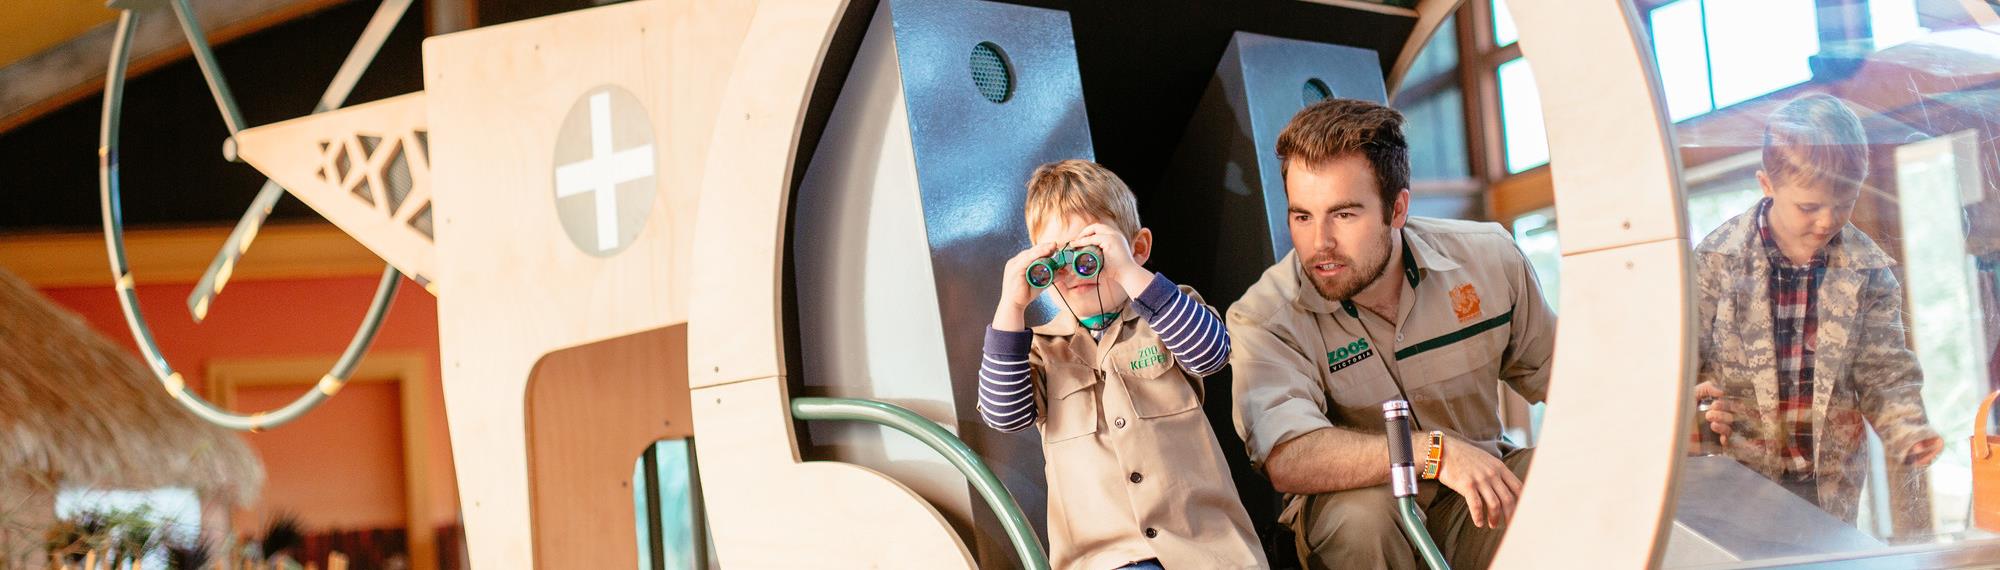 Child looking through binoculars with safari guide playing in a wooden helicopter in Ranger Kids indoor play centre.  